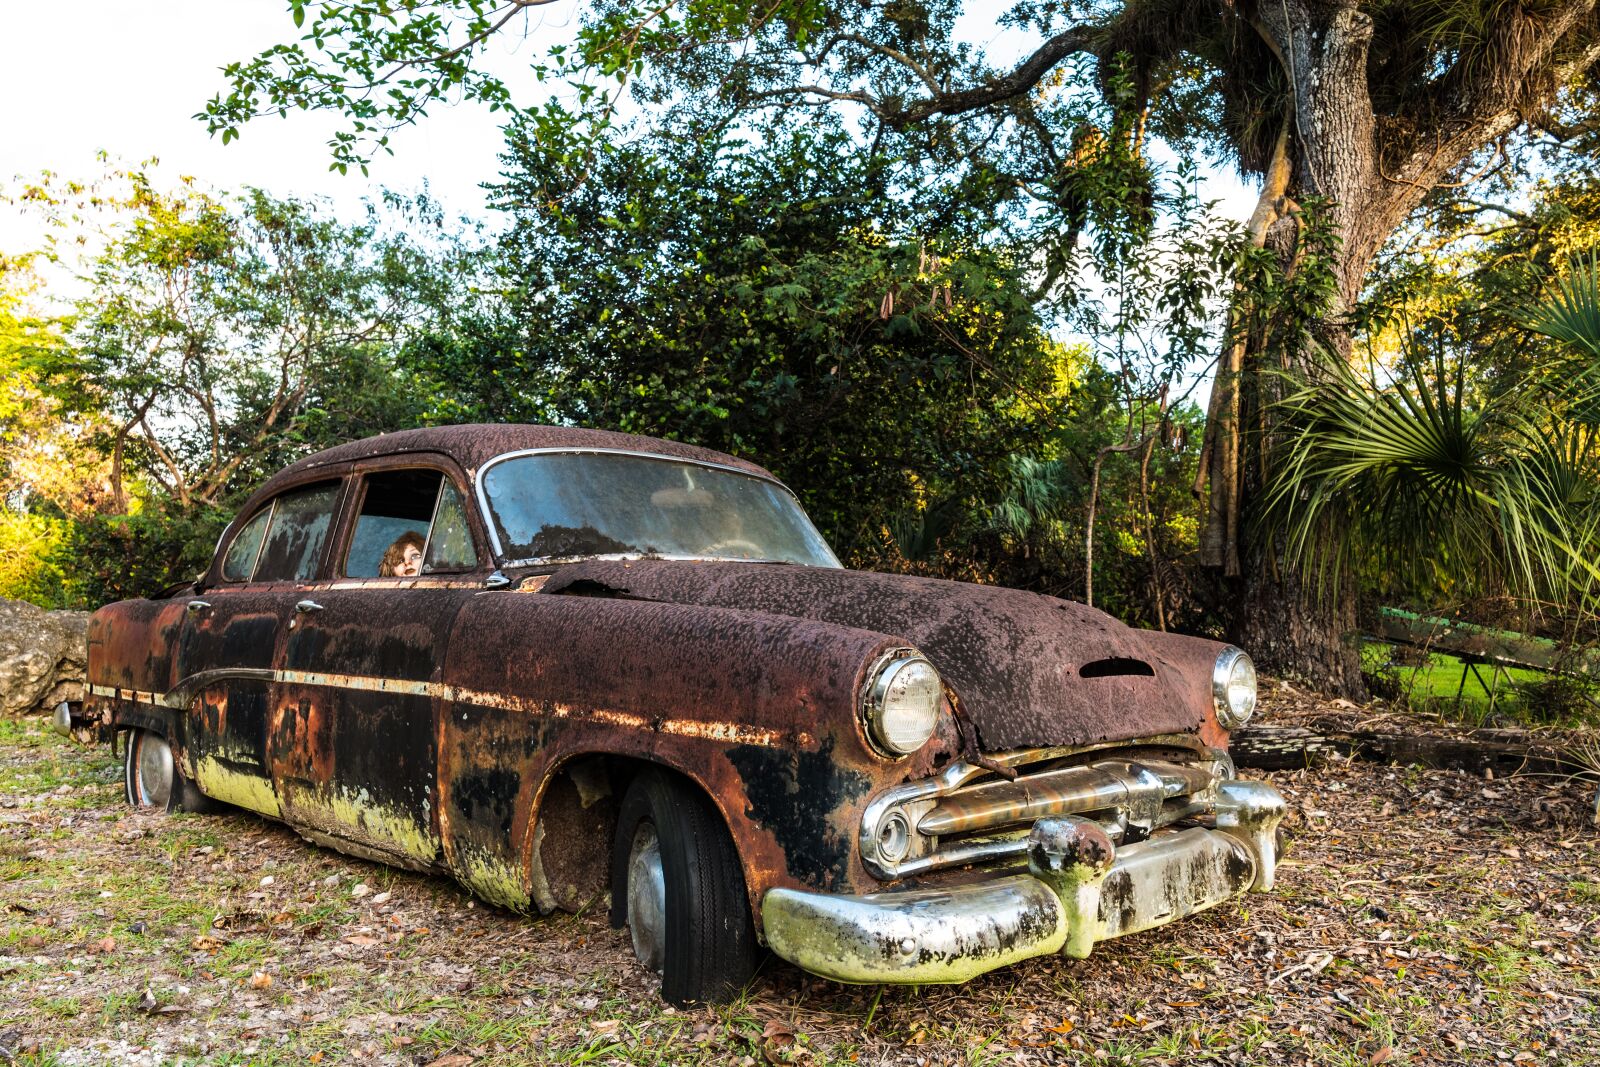 VARIO-ELMARIT 1:2.8-4.0/24-90mm ASPH. OIS sample photo. Old rusted car, old photography